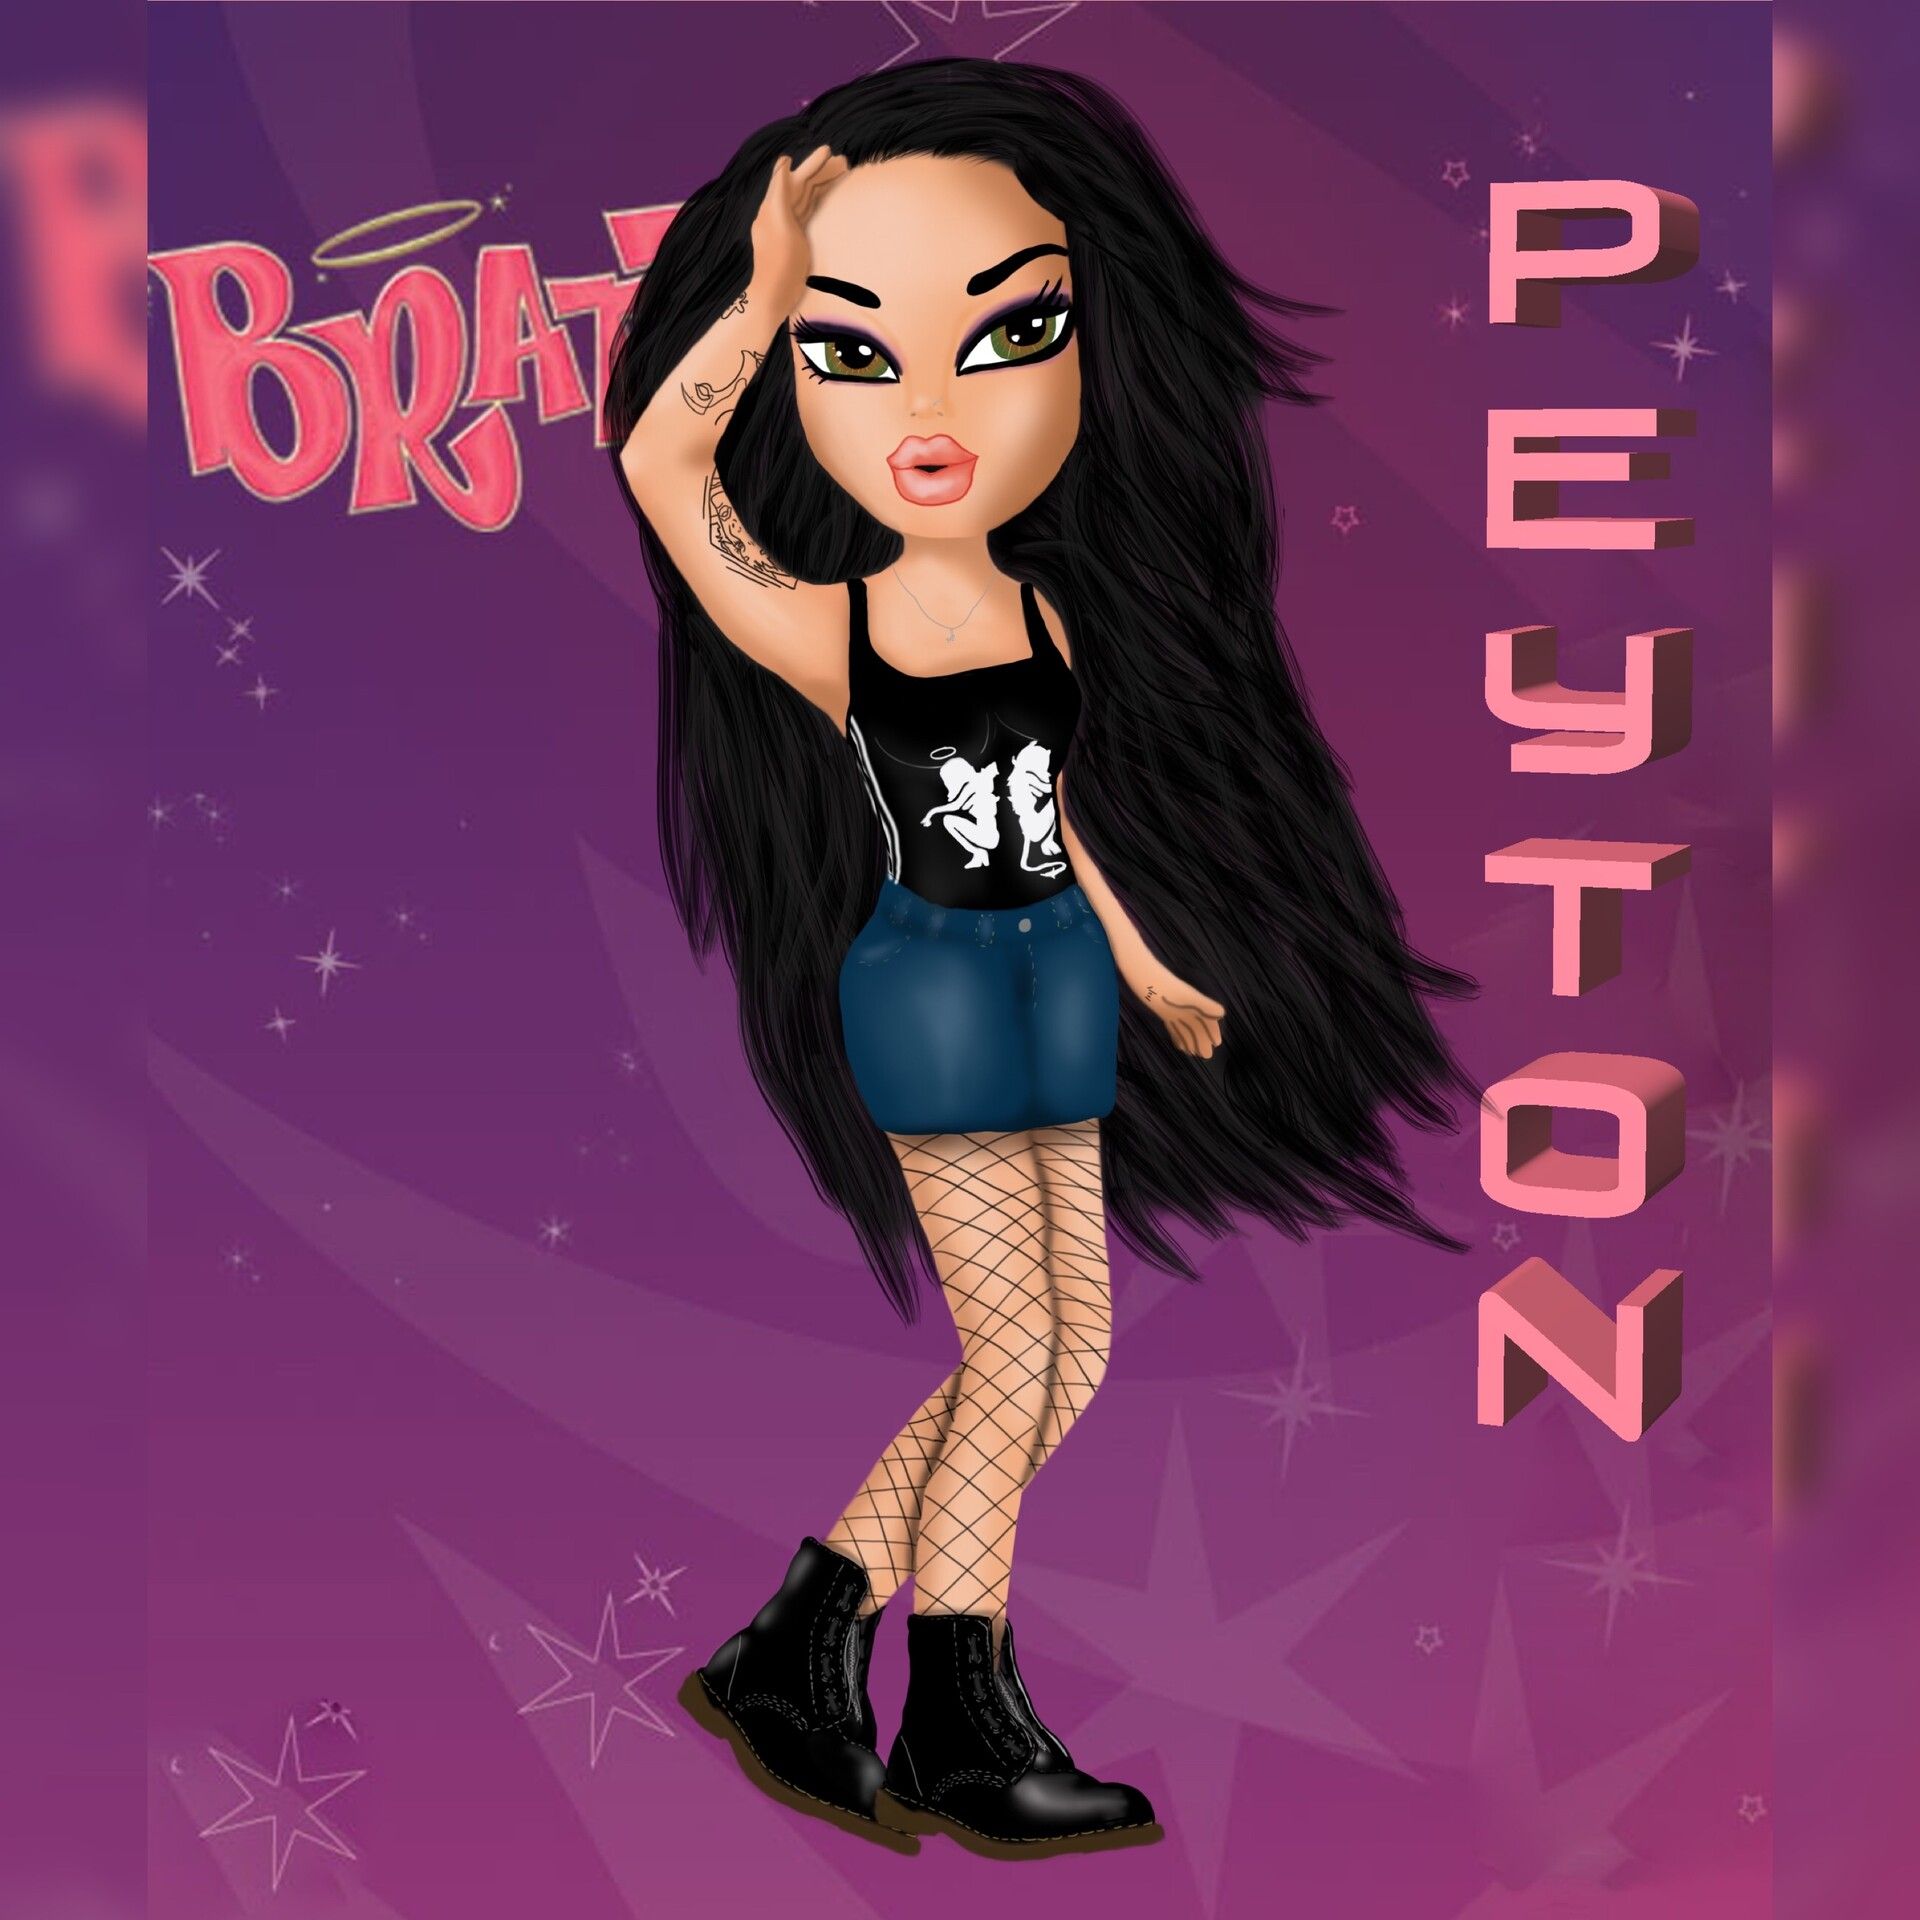 A cartoon character with long hair and black boots - Bratz